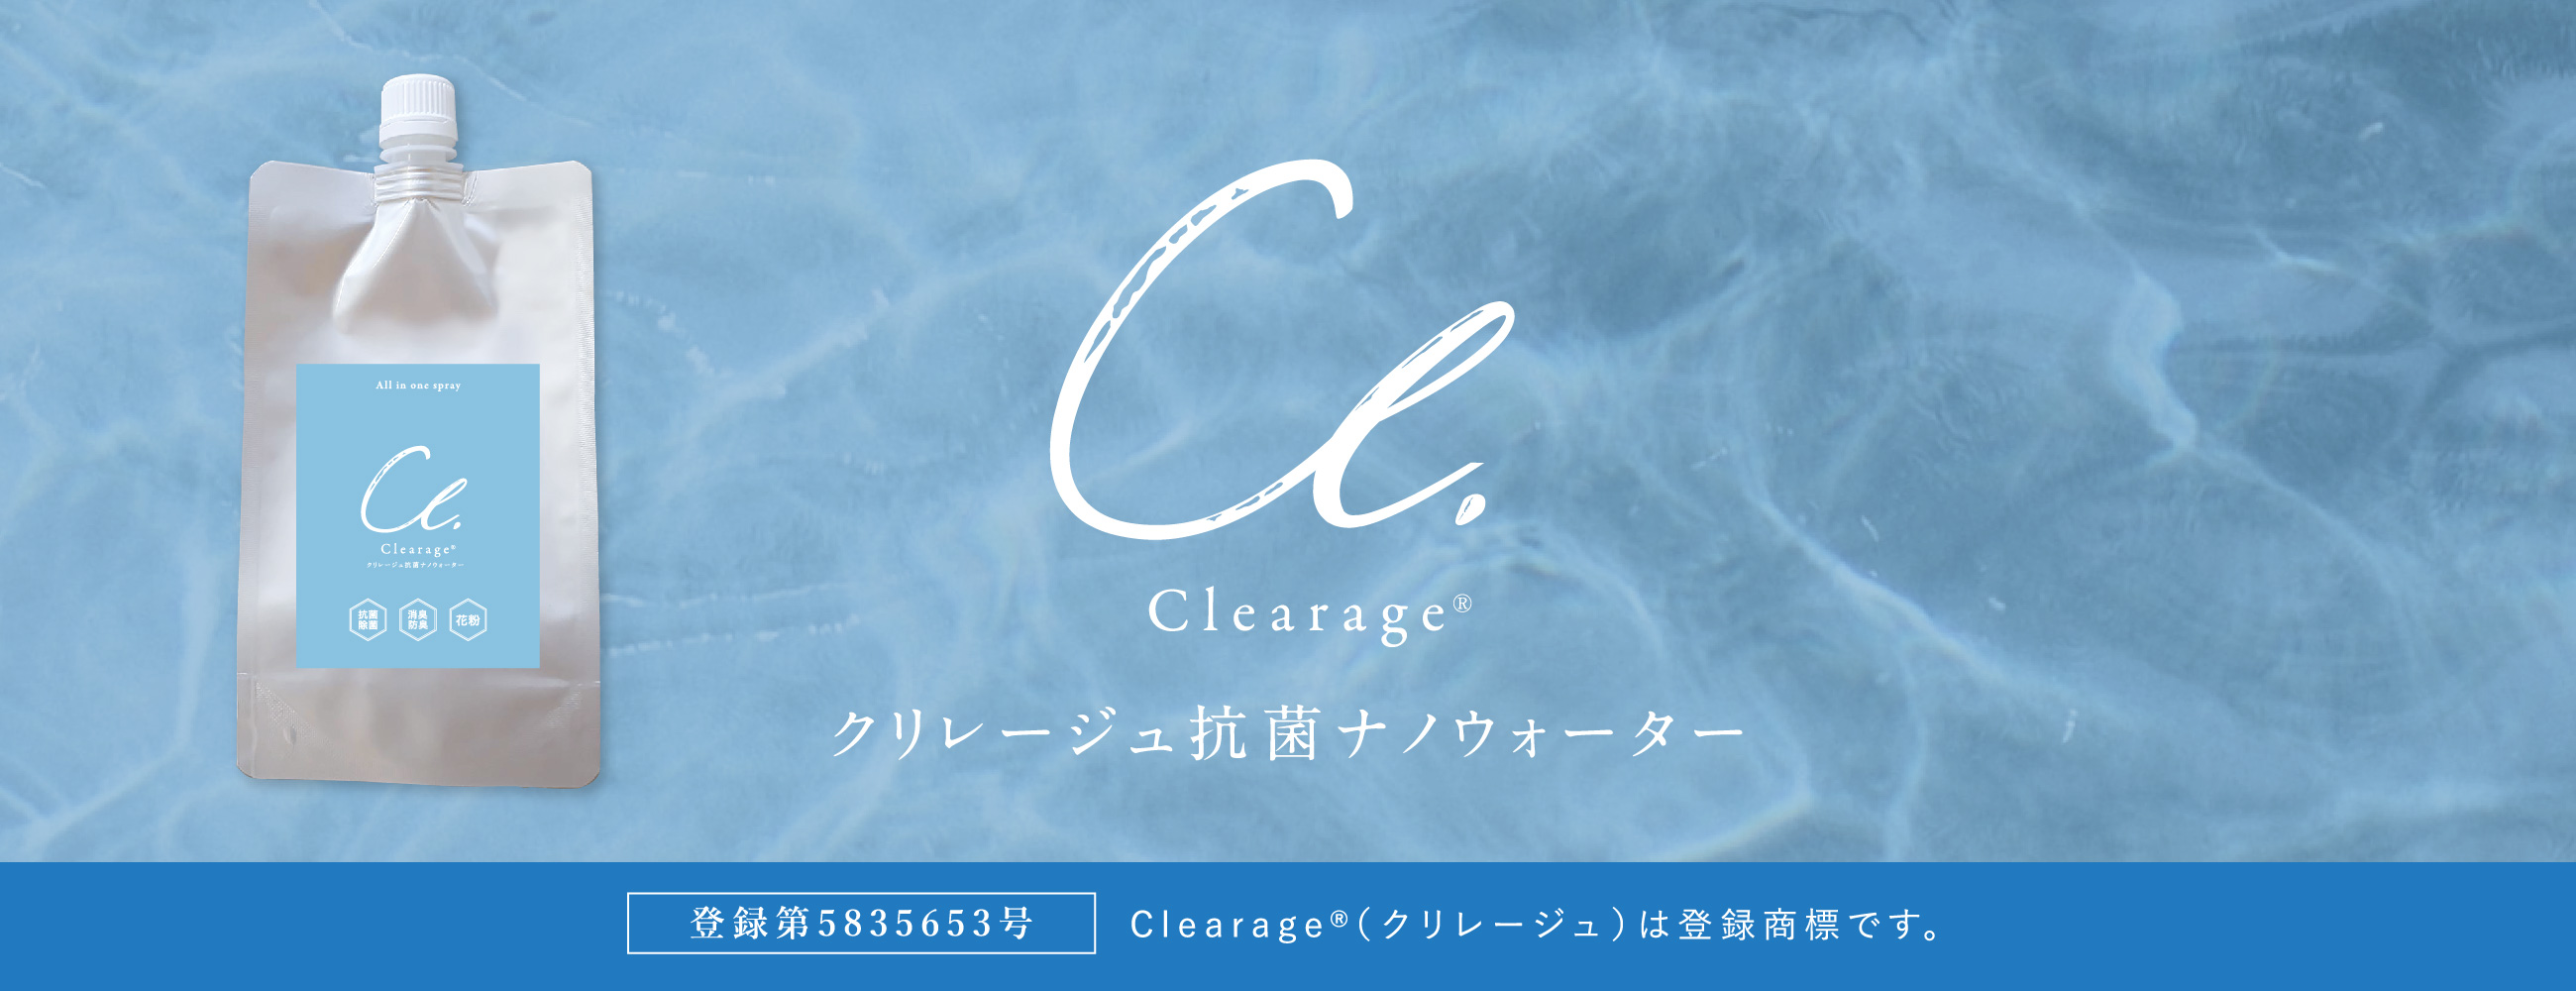 Clearage®（クリレージュ）抗菌ナノウォーター